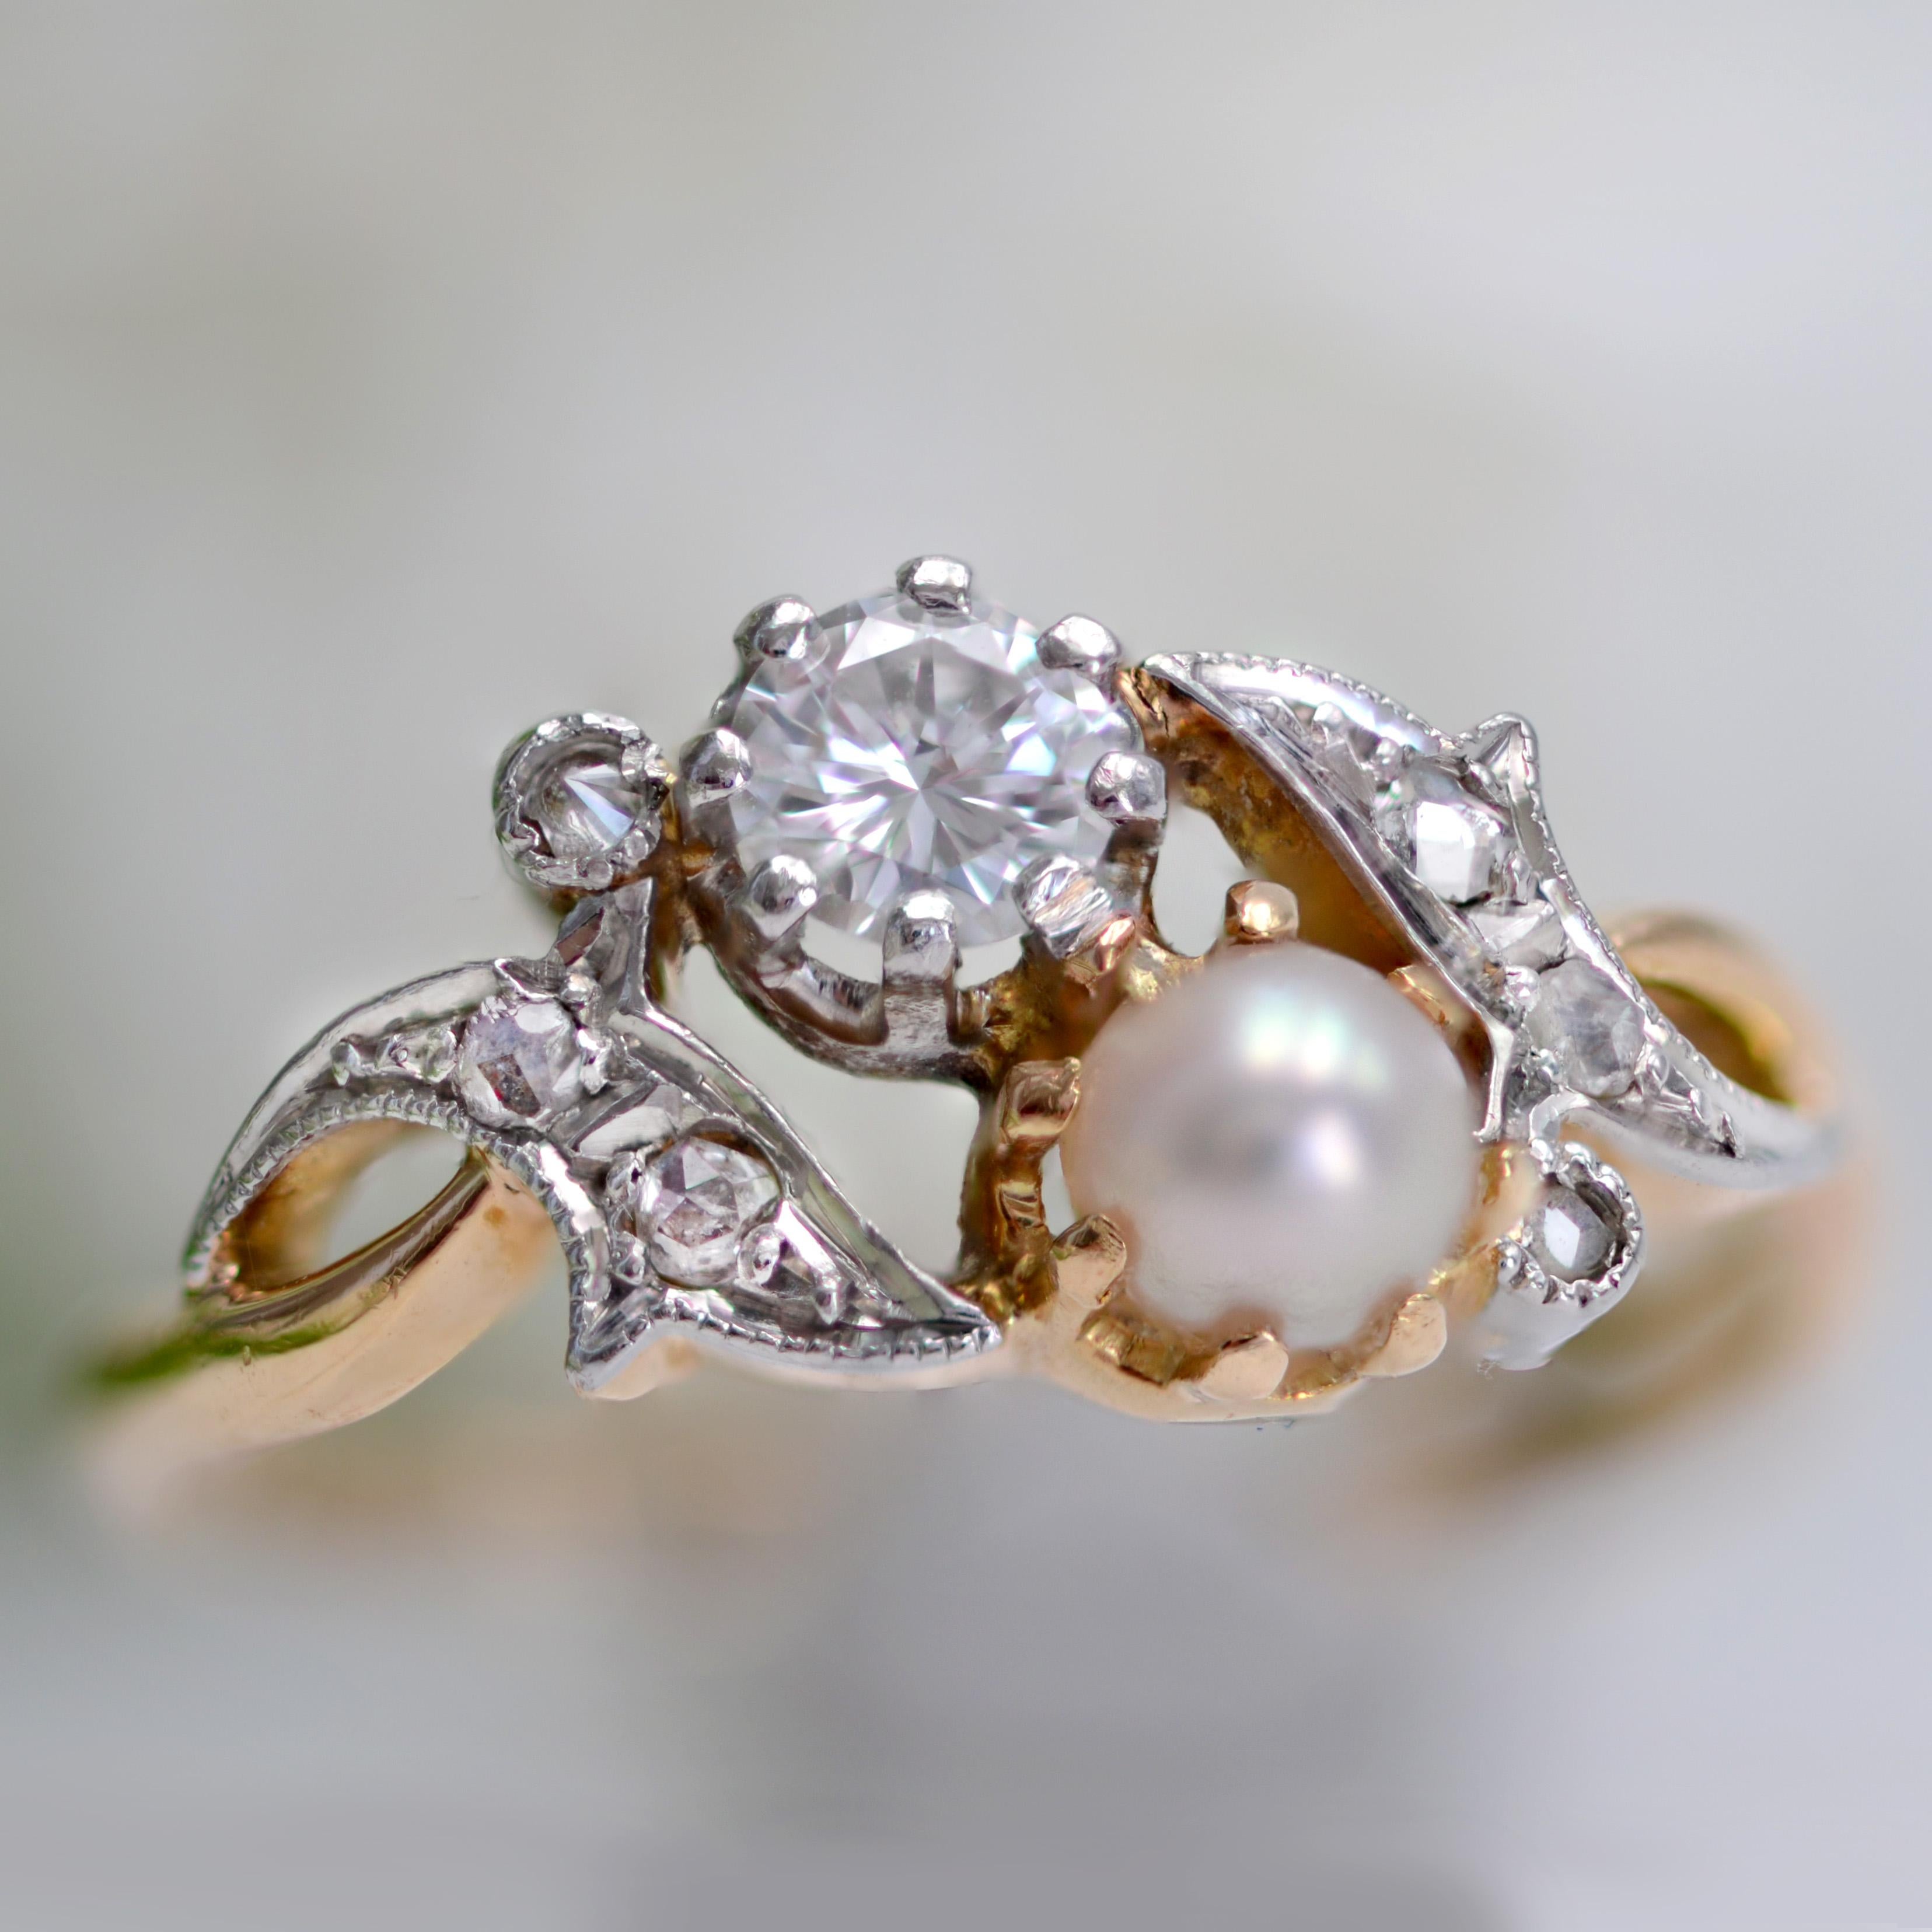 Brilliant Cut French 1920s Pearl Diamond 18 Karat Yellow Gold You and Me Ring